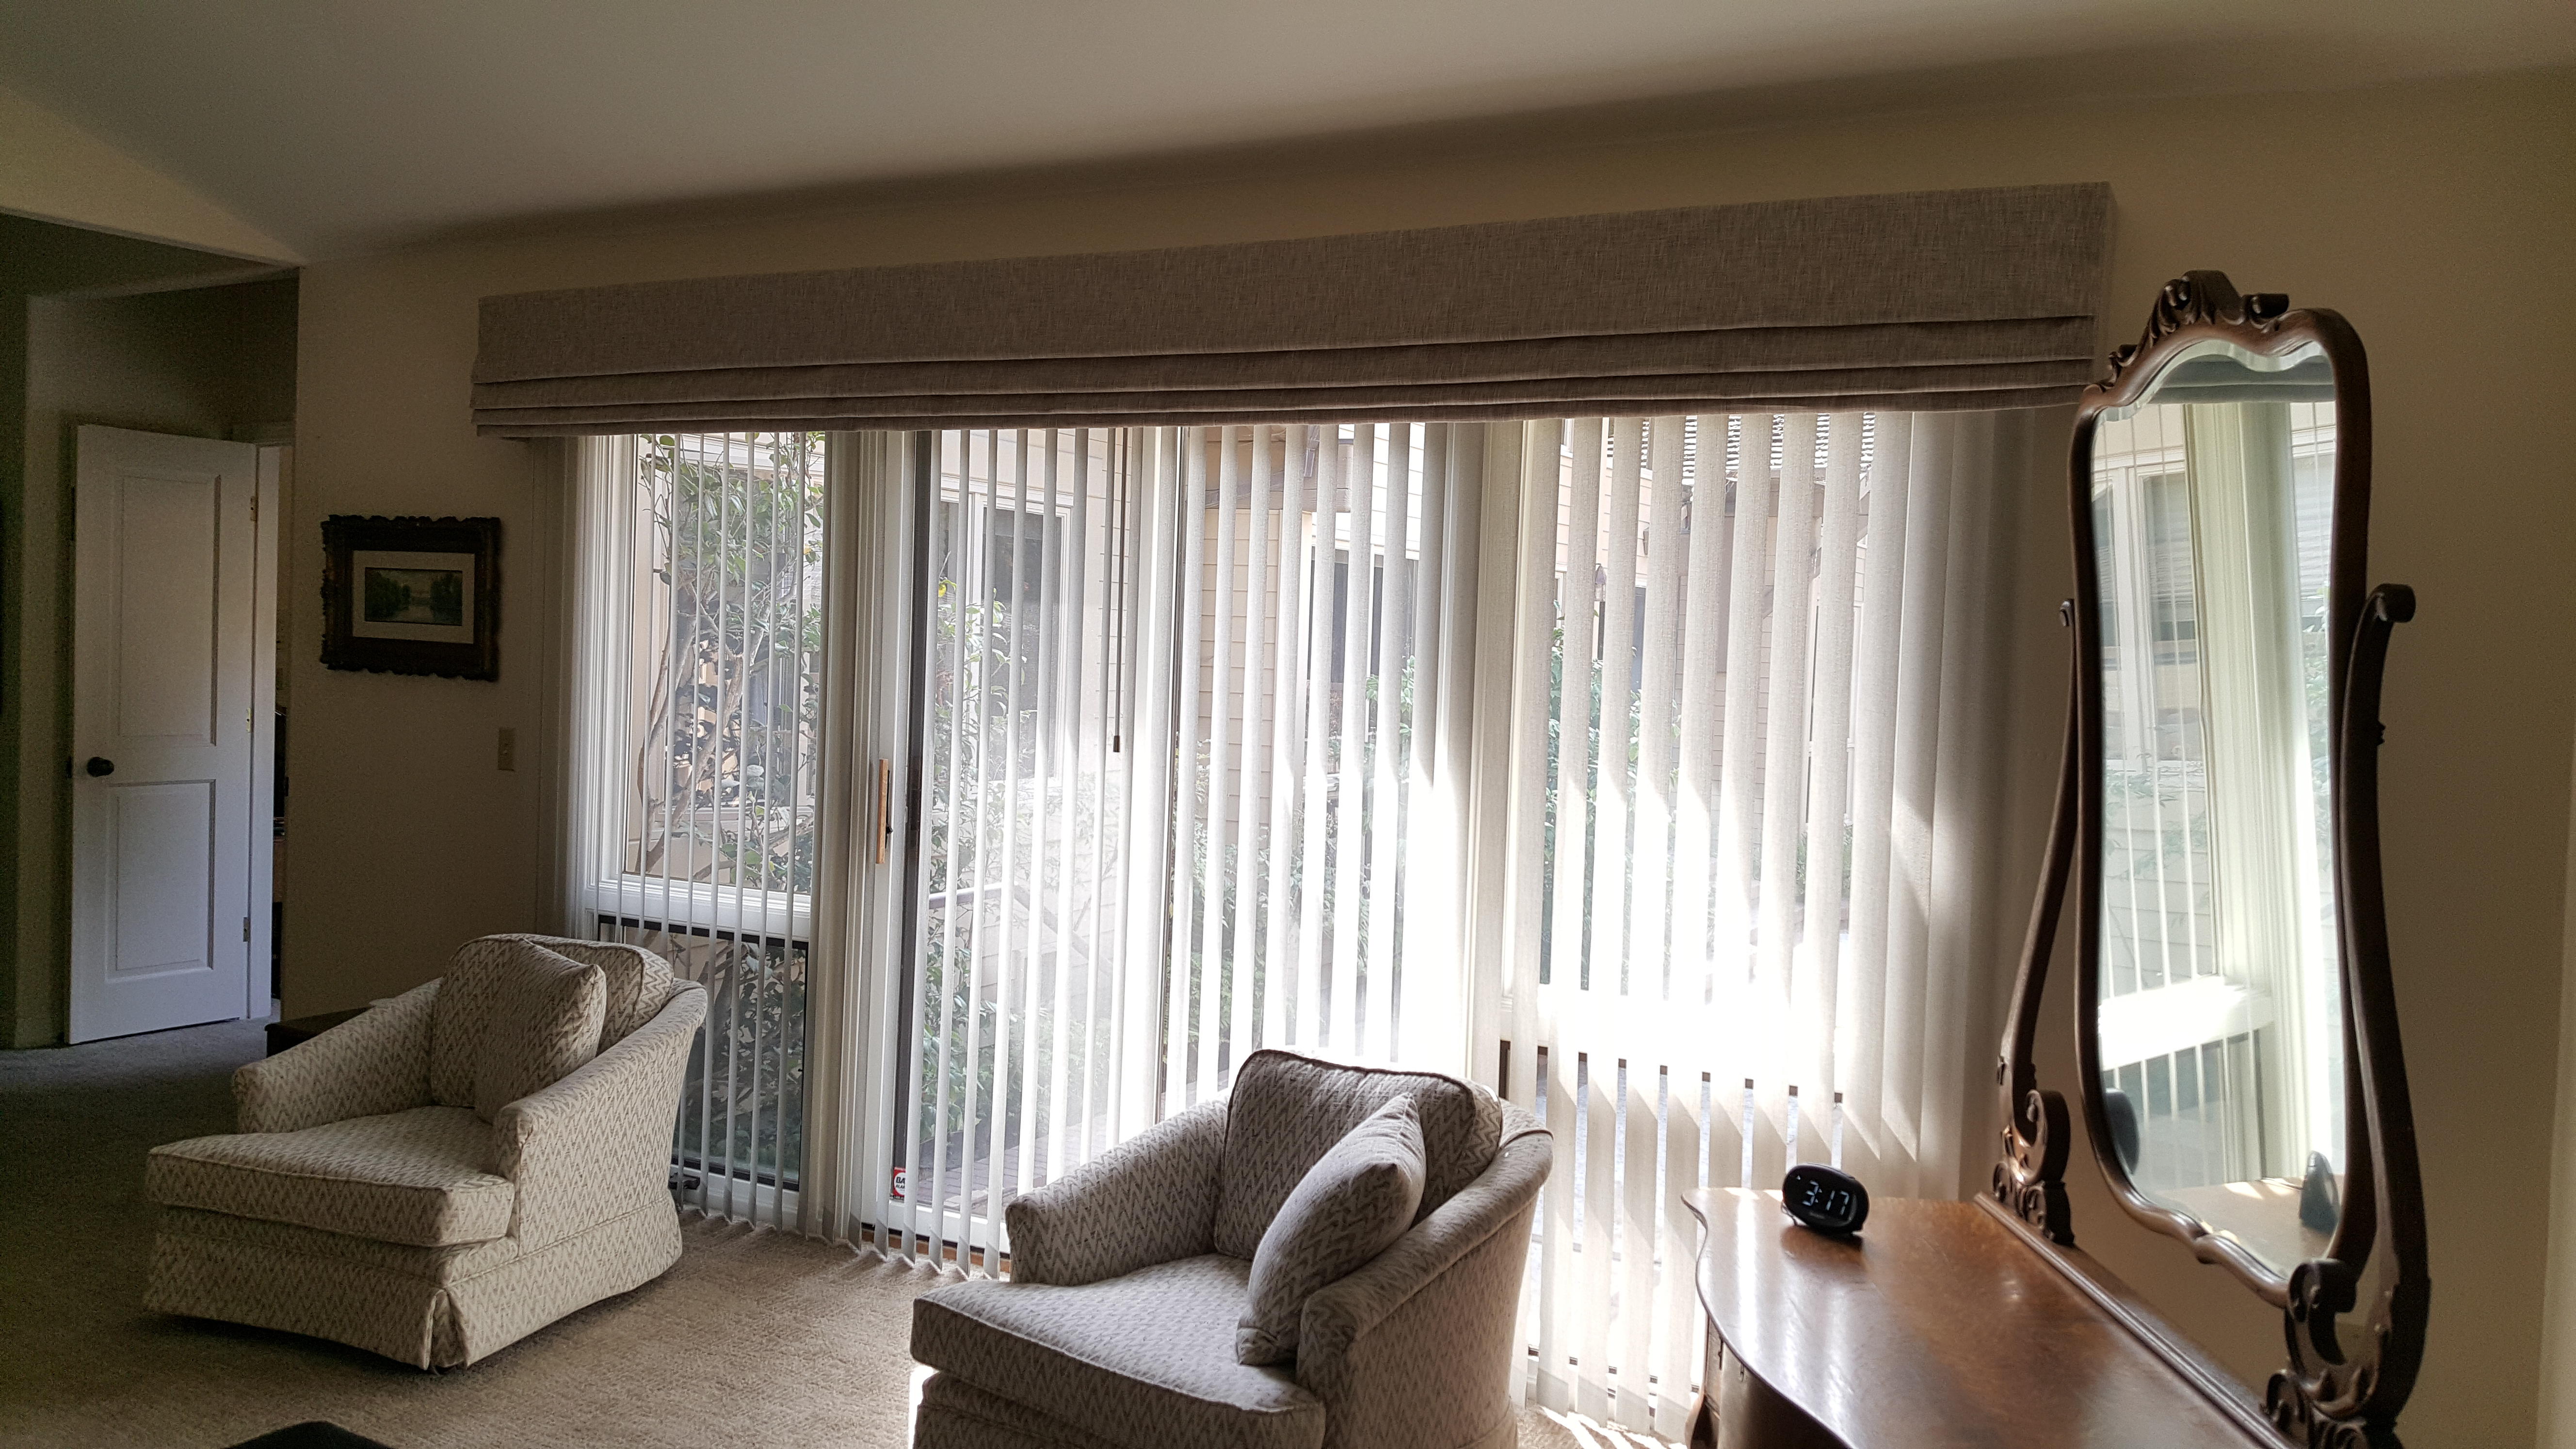 Large Roman valance over Vertical Blind in a master bedroom